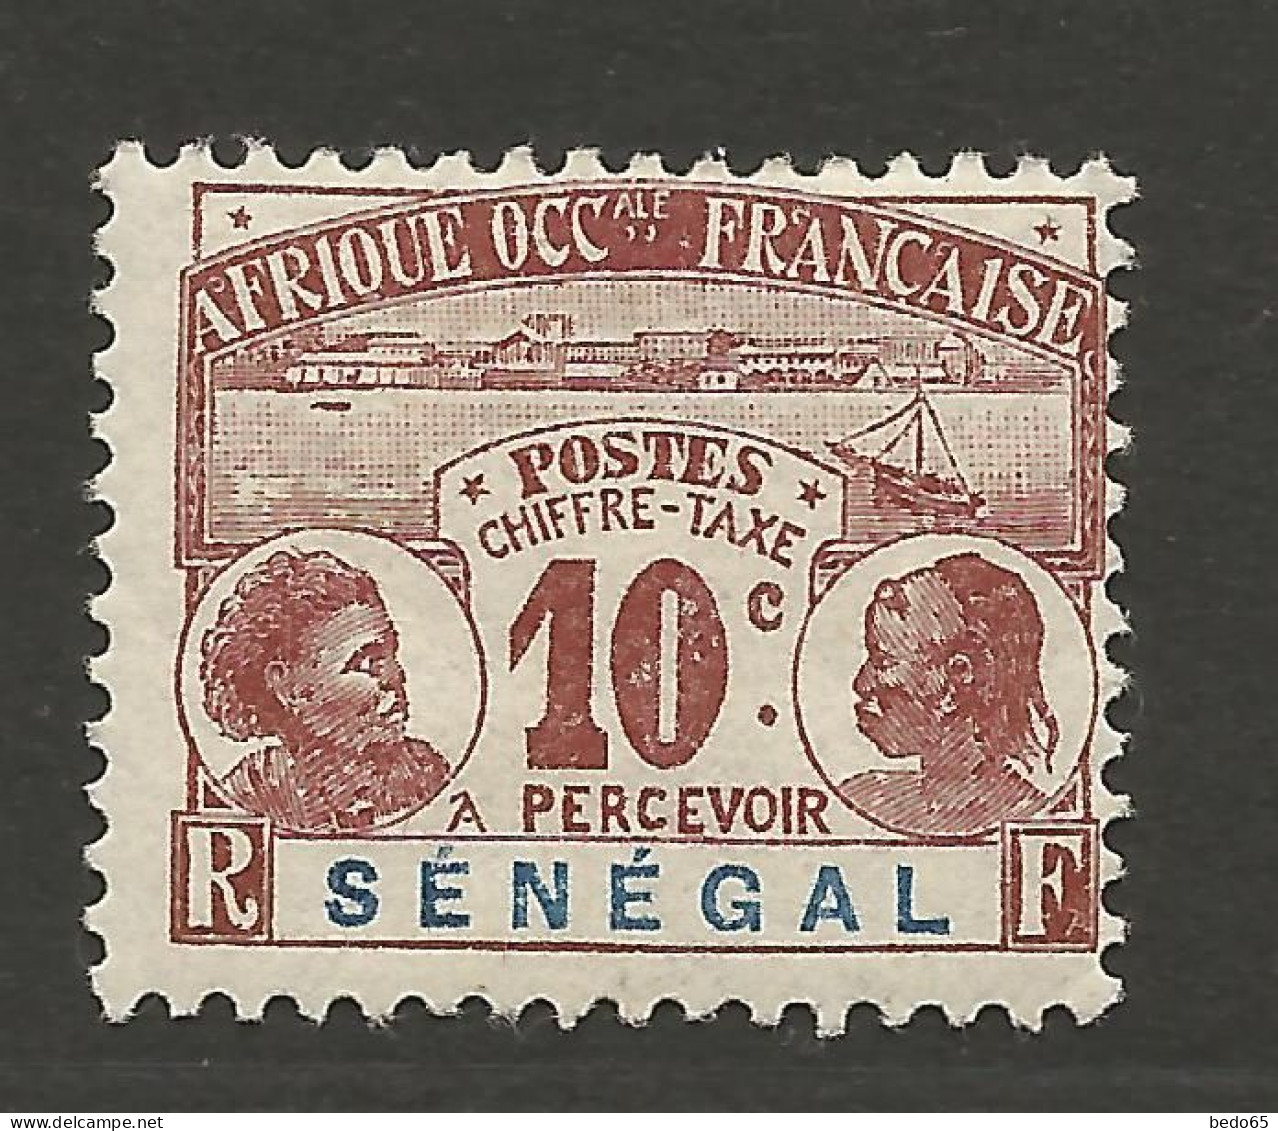 SENEGAL TAXE N° 5 NEUF*  CHARNIERE / Hinge / MH - Timbres-taxe